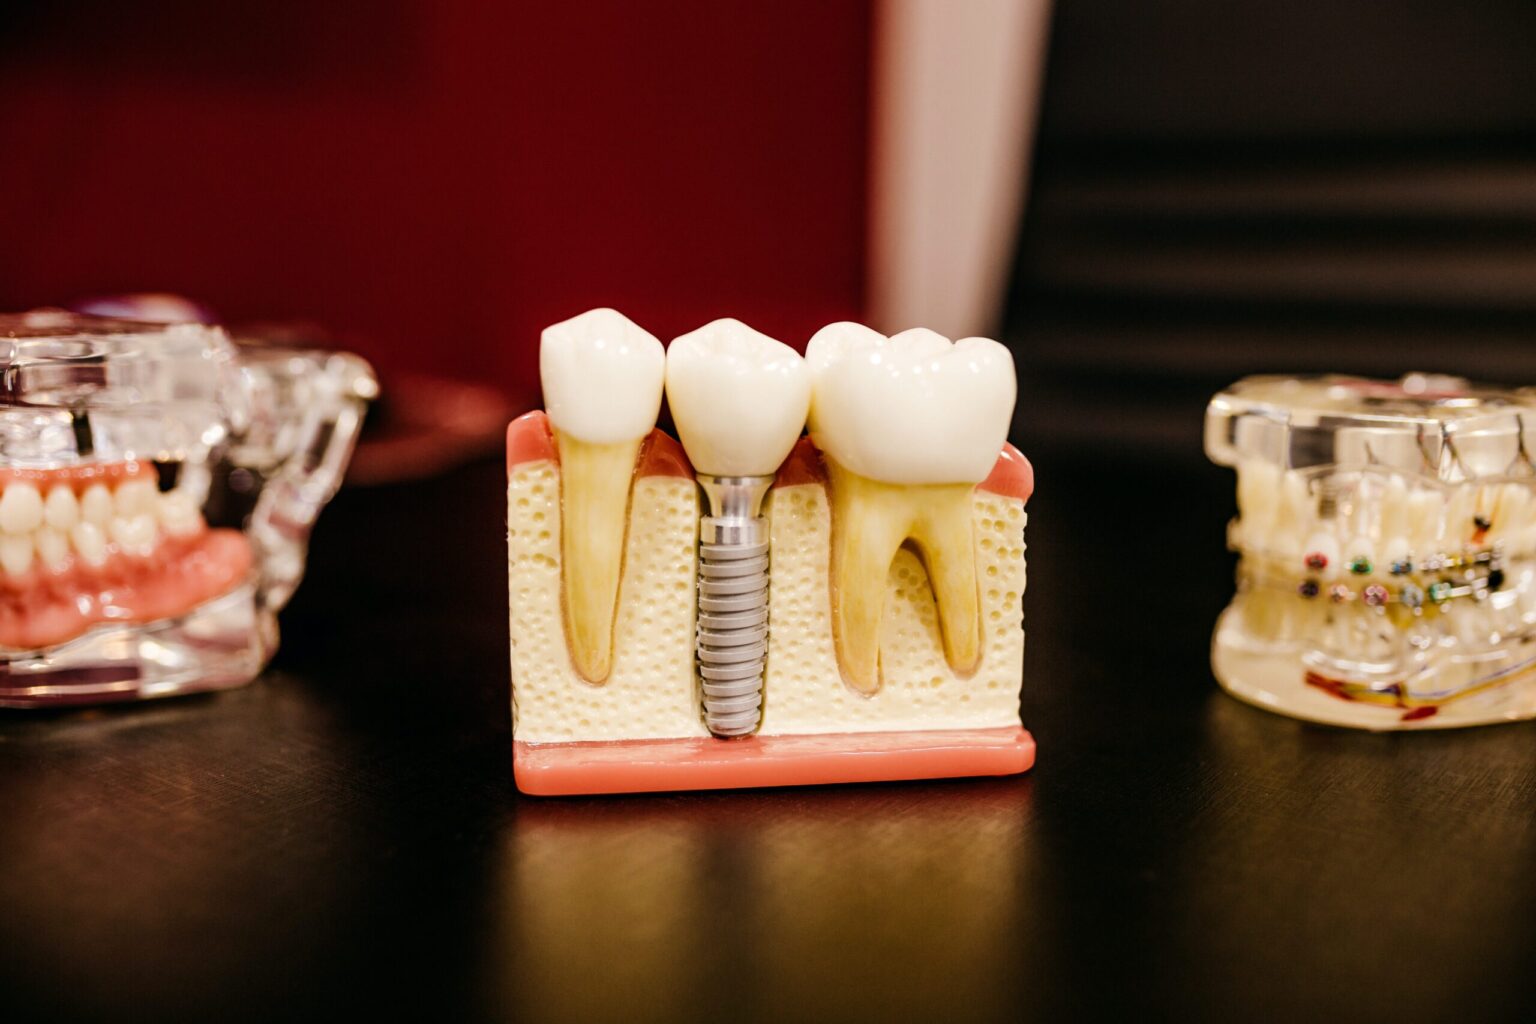 Dental implant model displaying a cross-section of tooth replacement with surrounding teeth and jawbone in a Texas dentistry clinic.